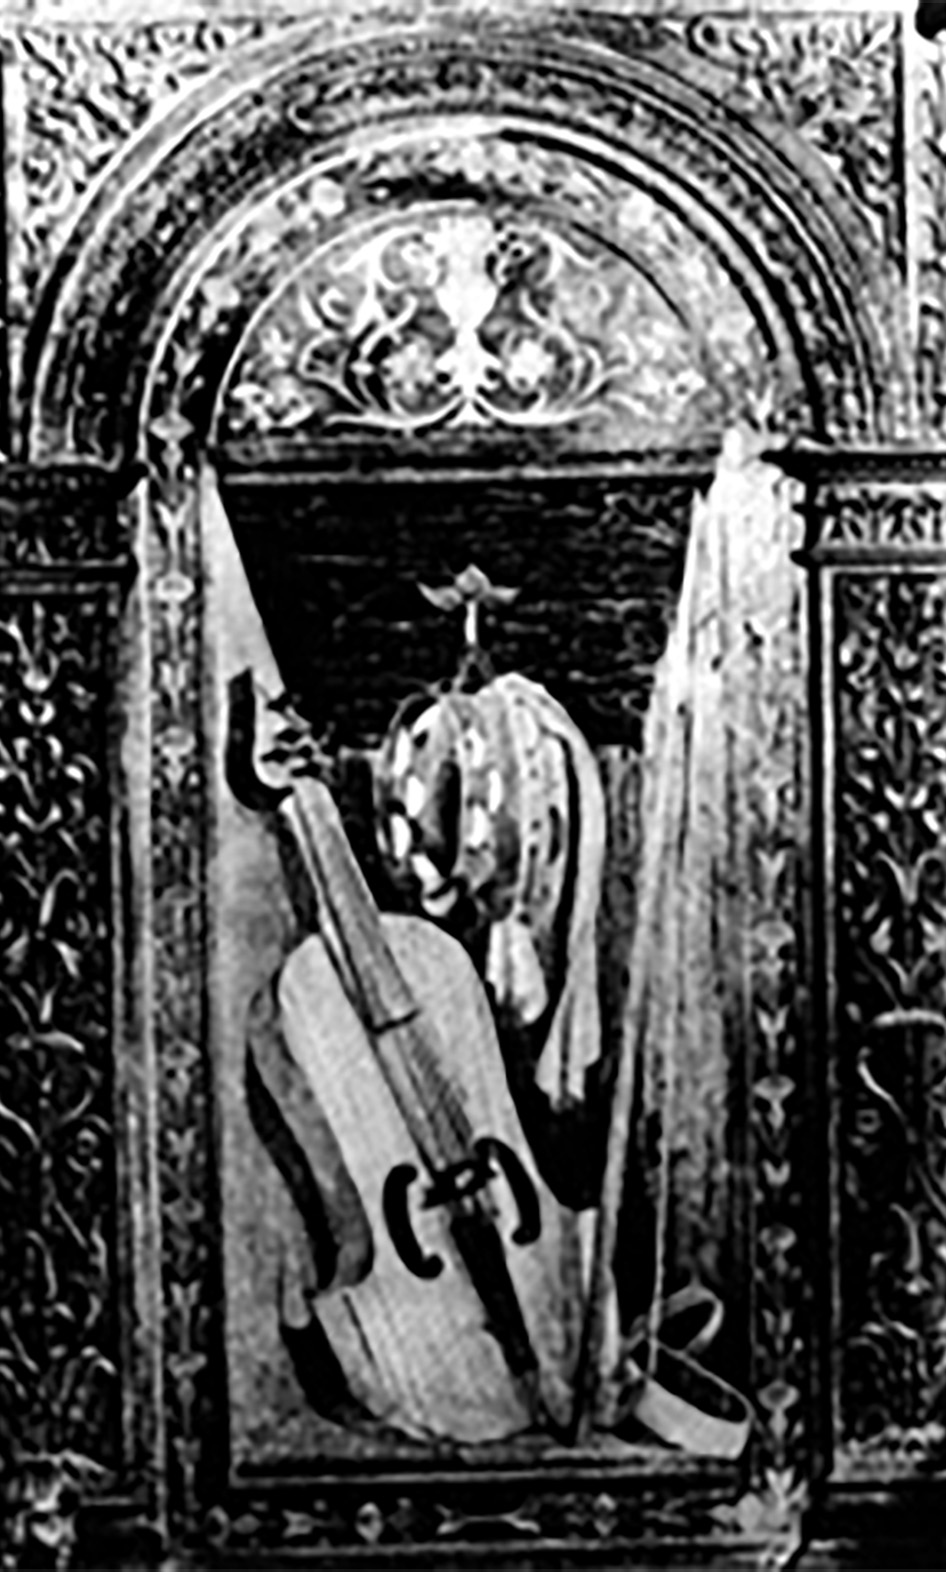 Stone bass relief showing an early cello